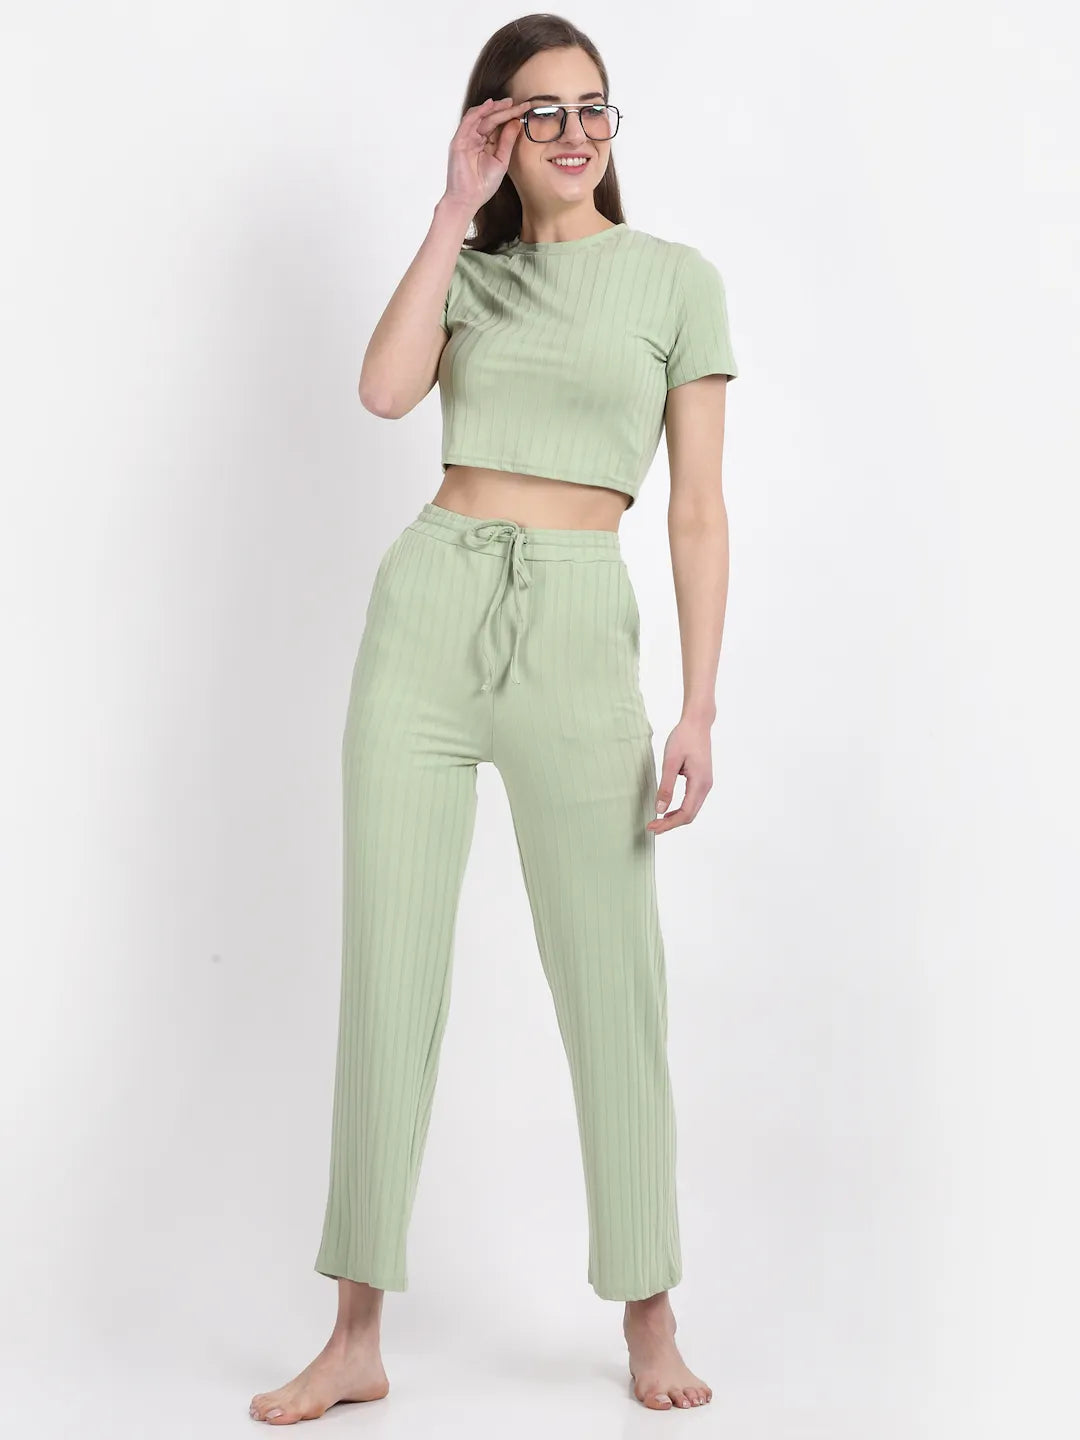 Women Solid Green Night Suit and Loungewear (Top and Lower)